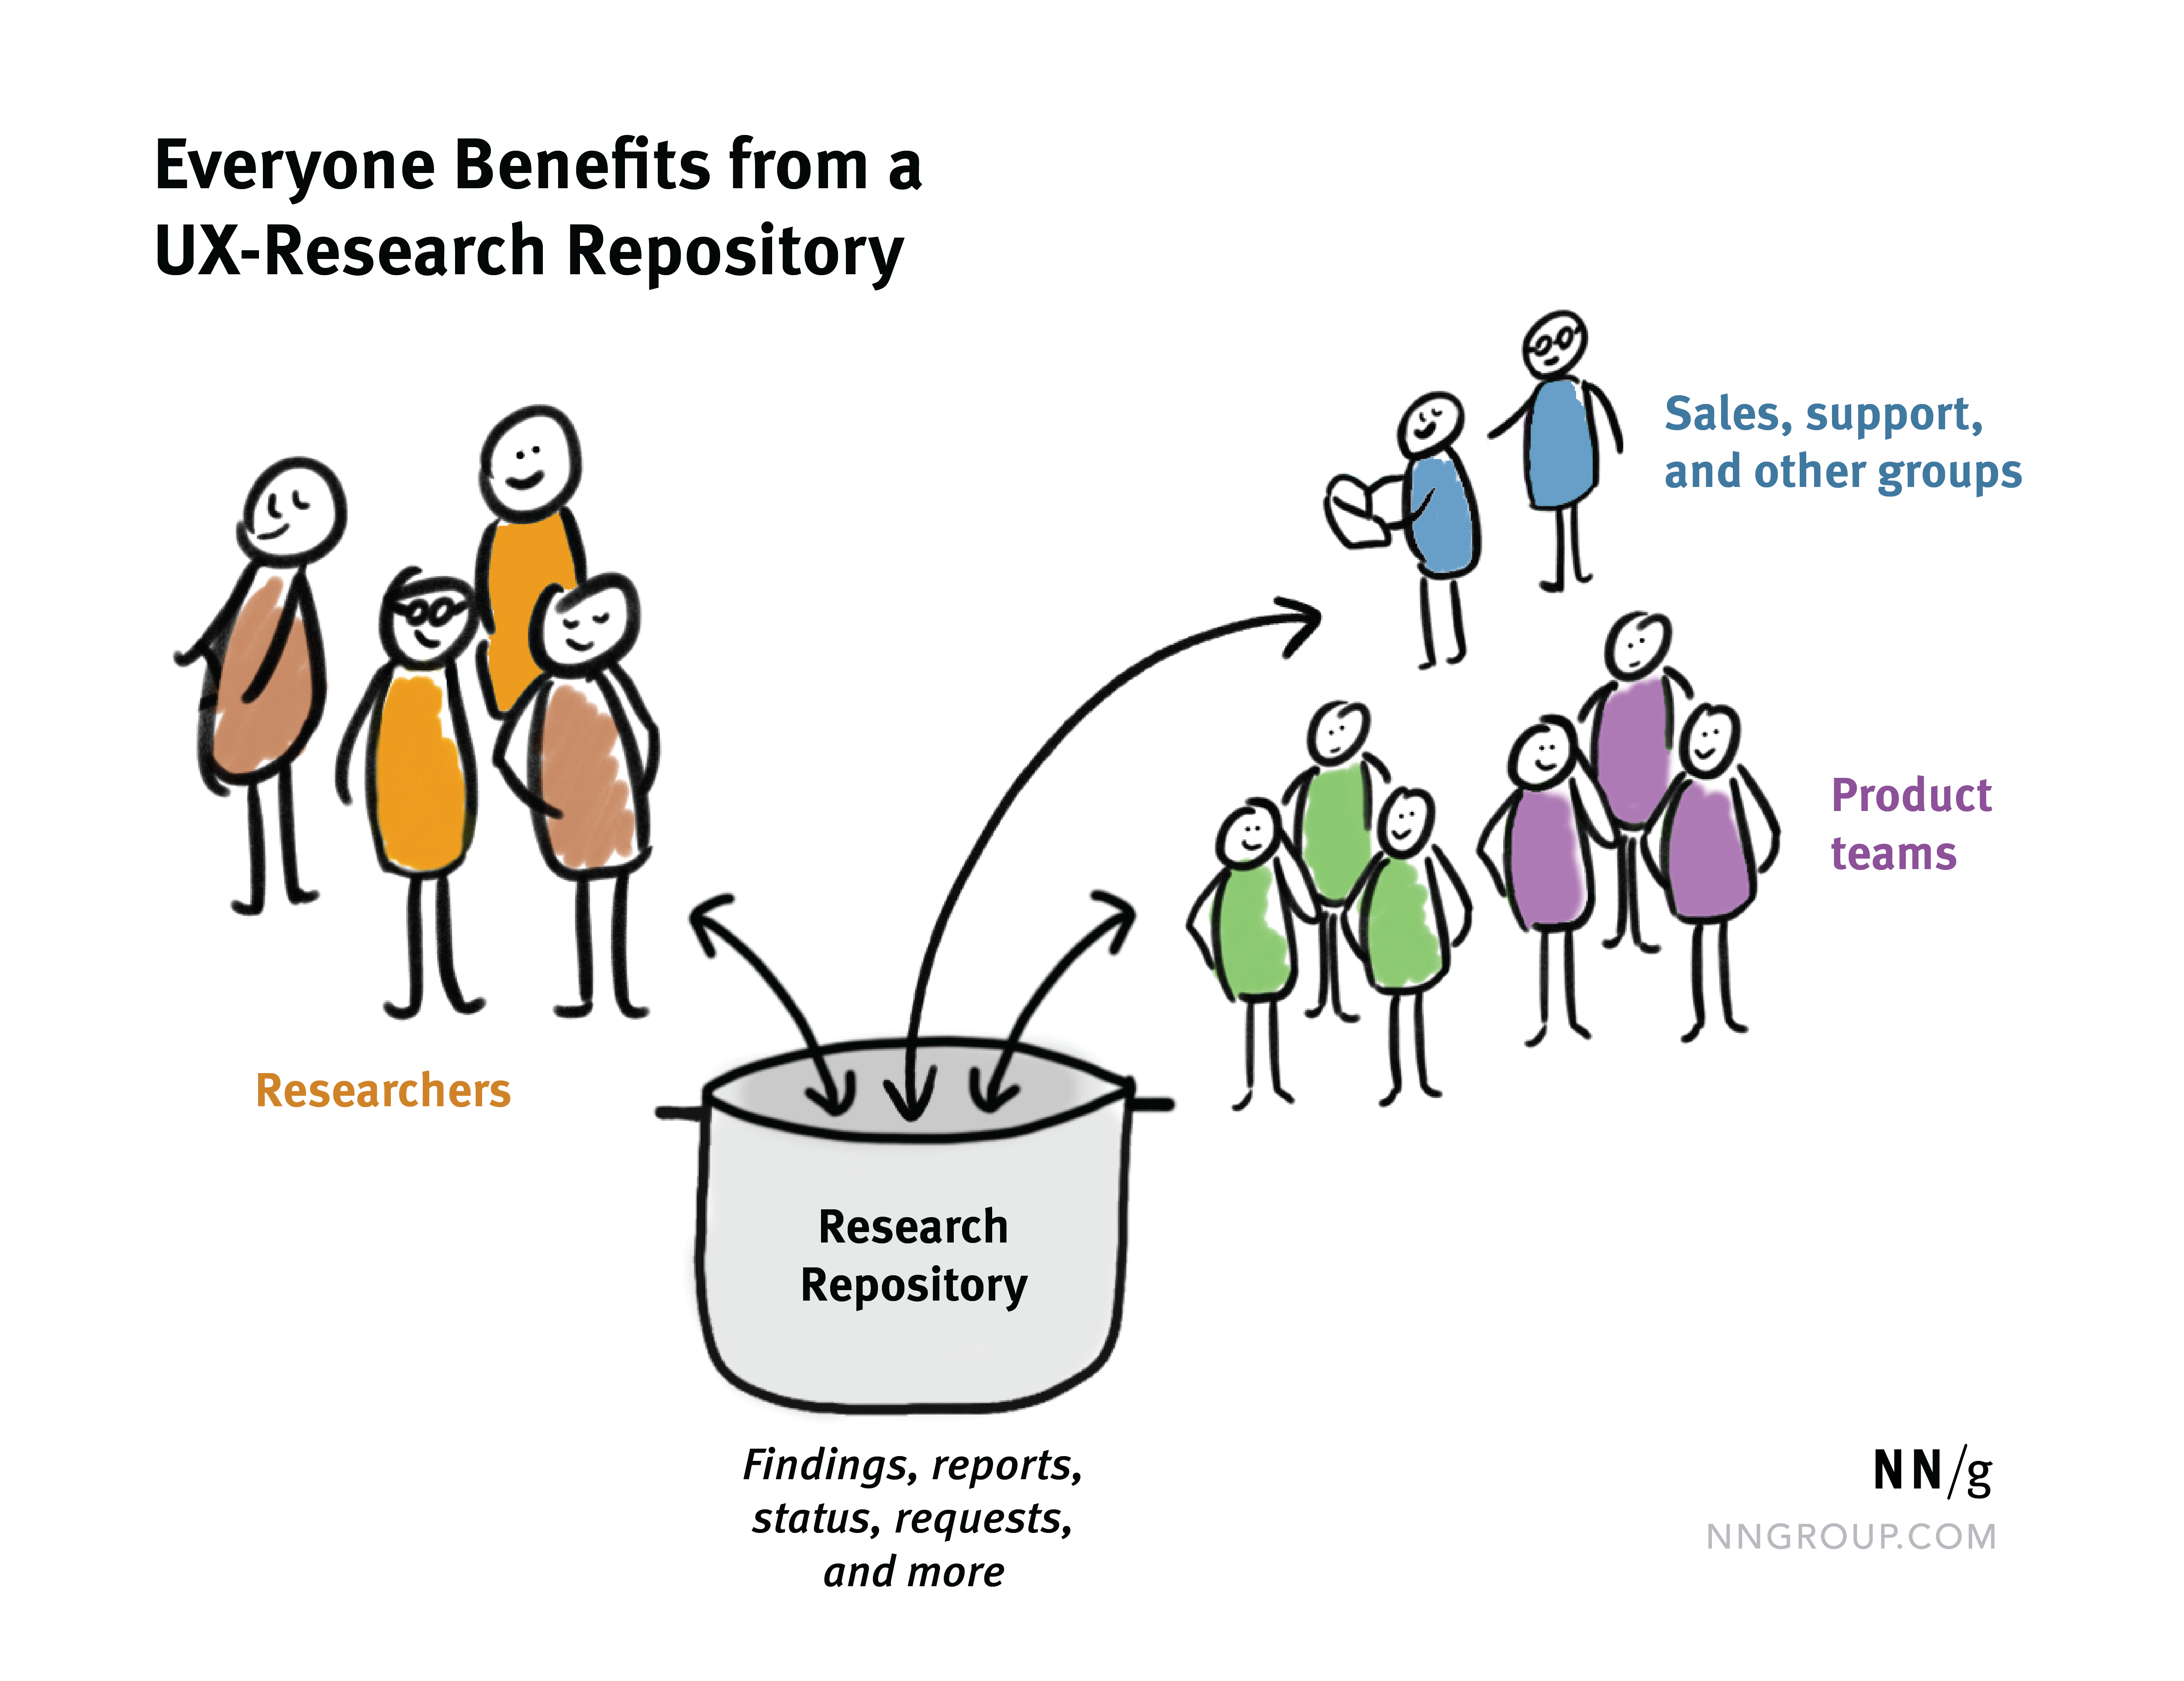 Stick figures of people "researchers, support, sales, and product teams" with arrows point in and out of a "research repository" pot